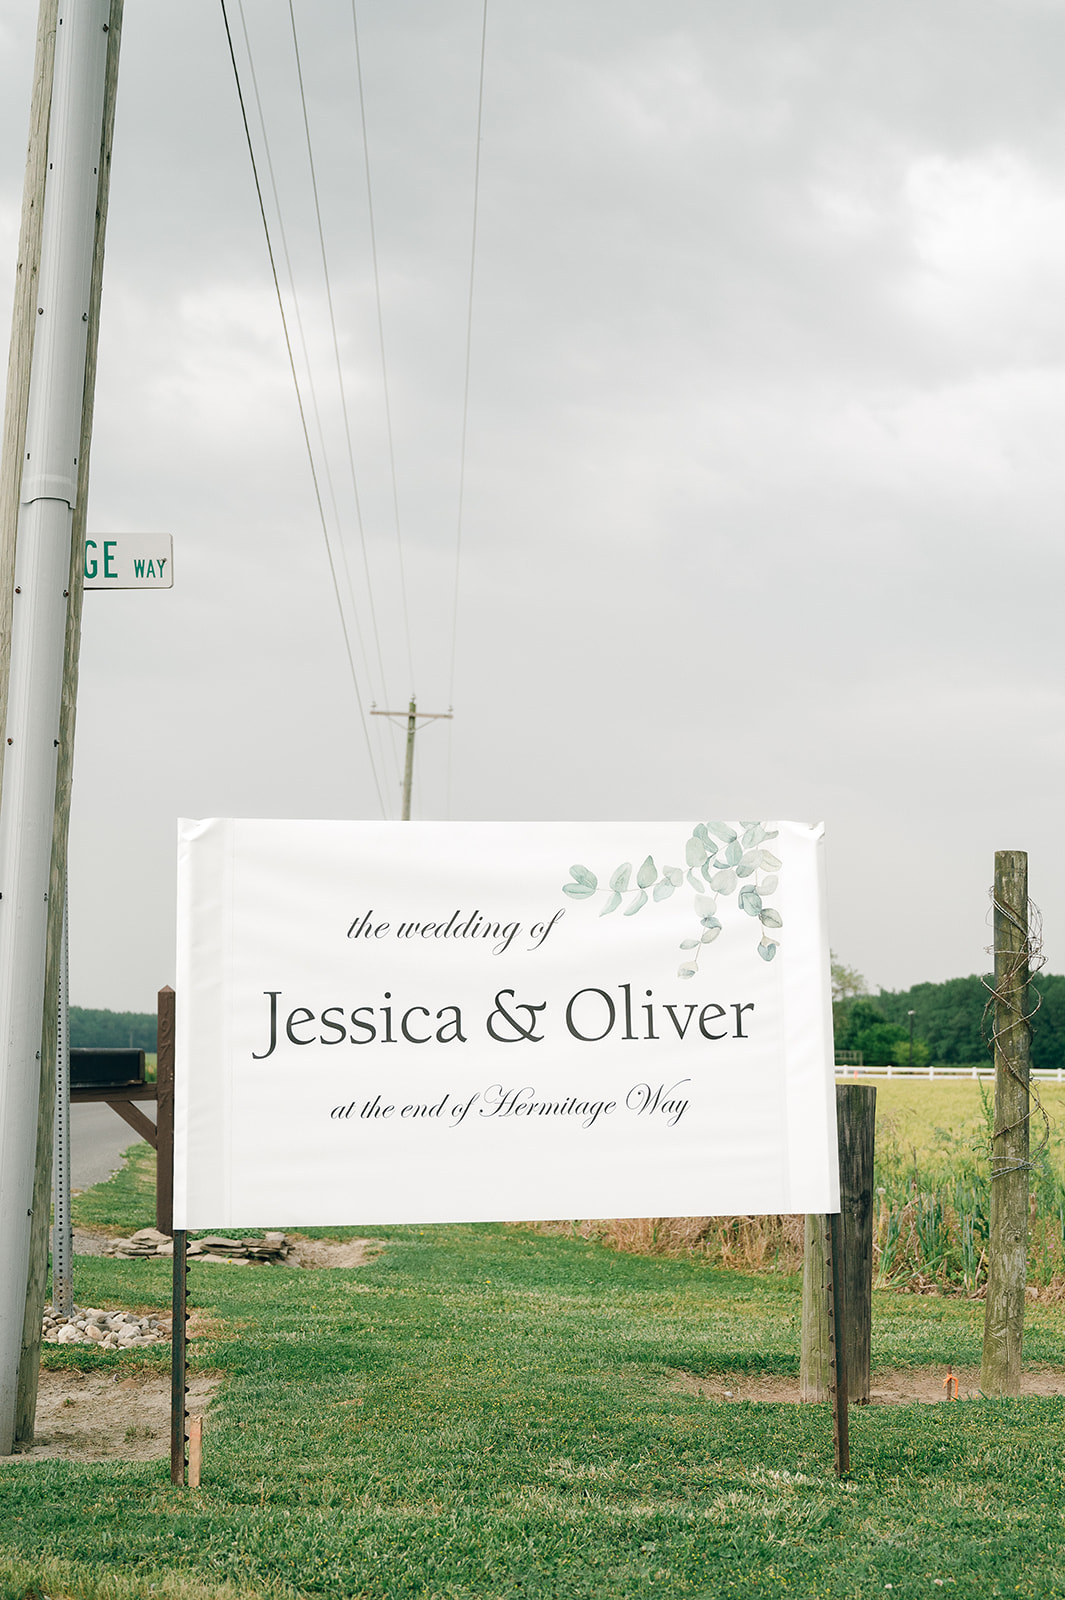 Oliver & Jess were married on a day that poured rain in Milton, DE.